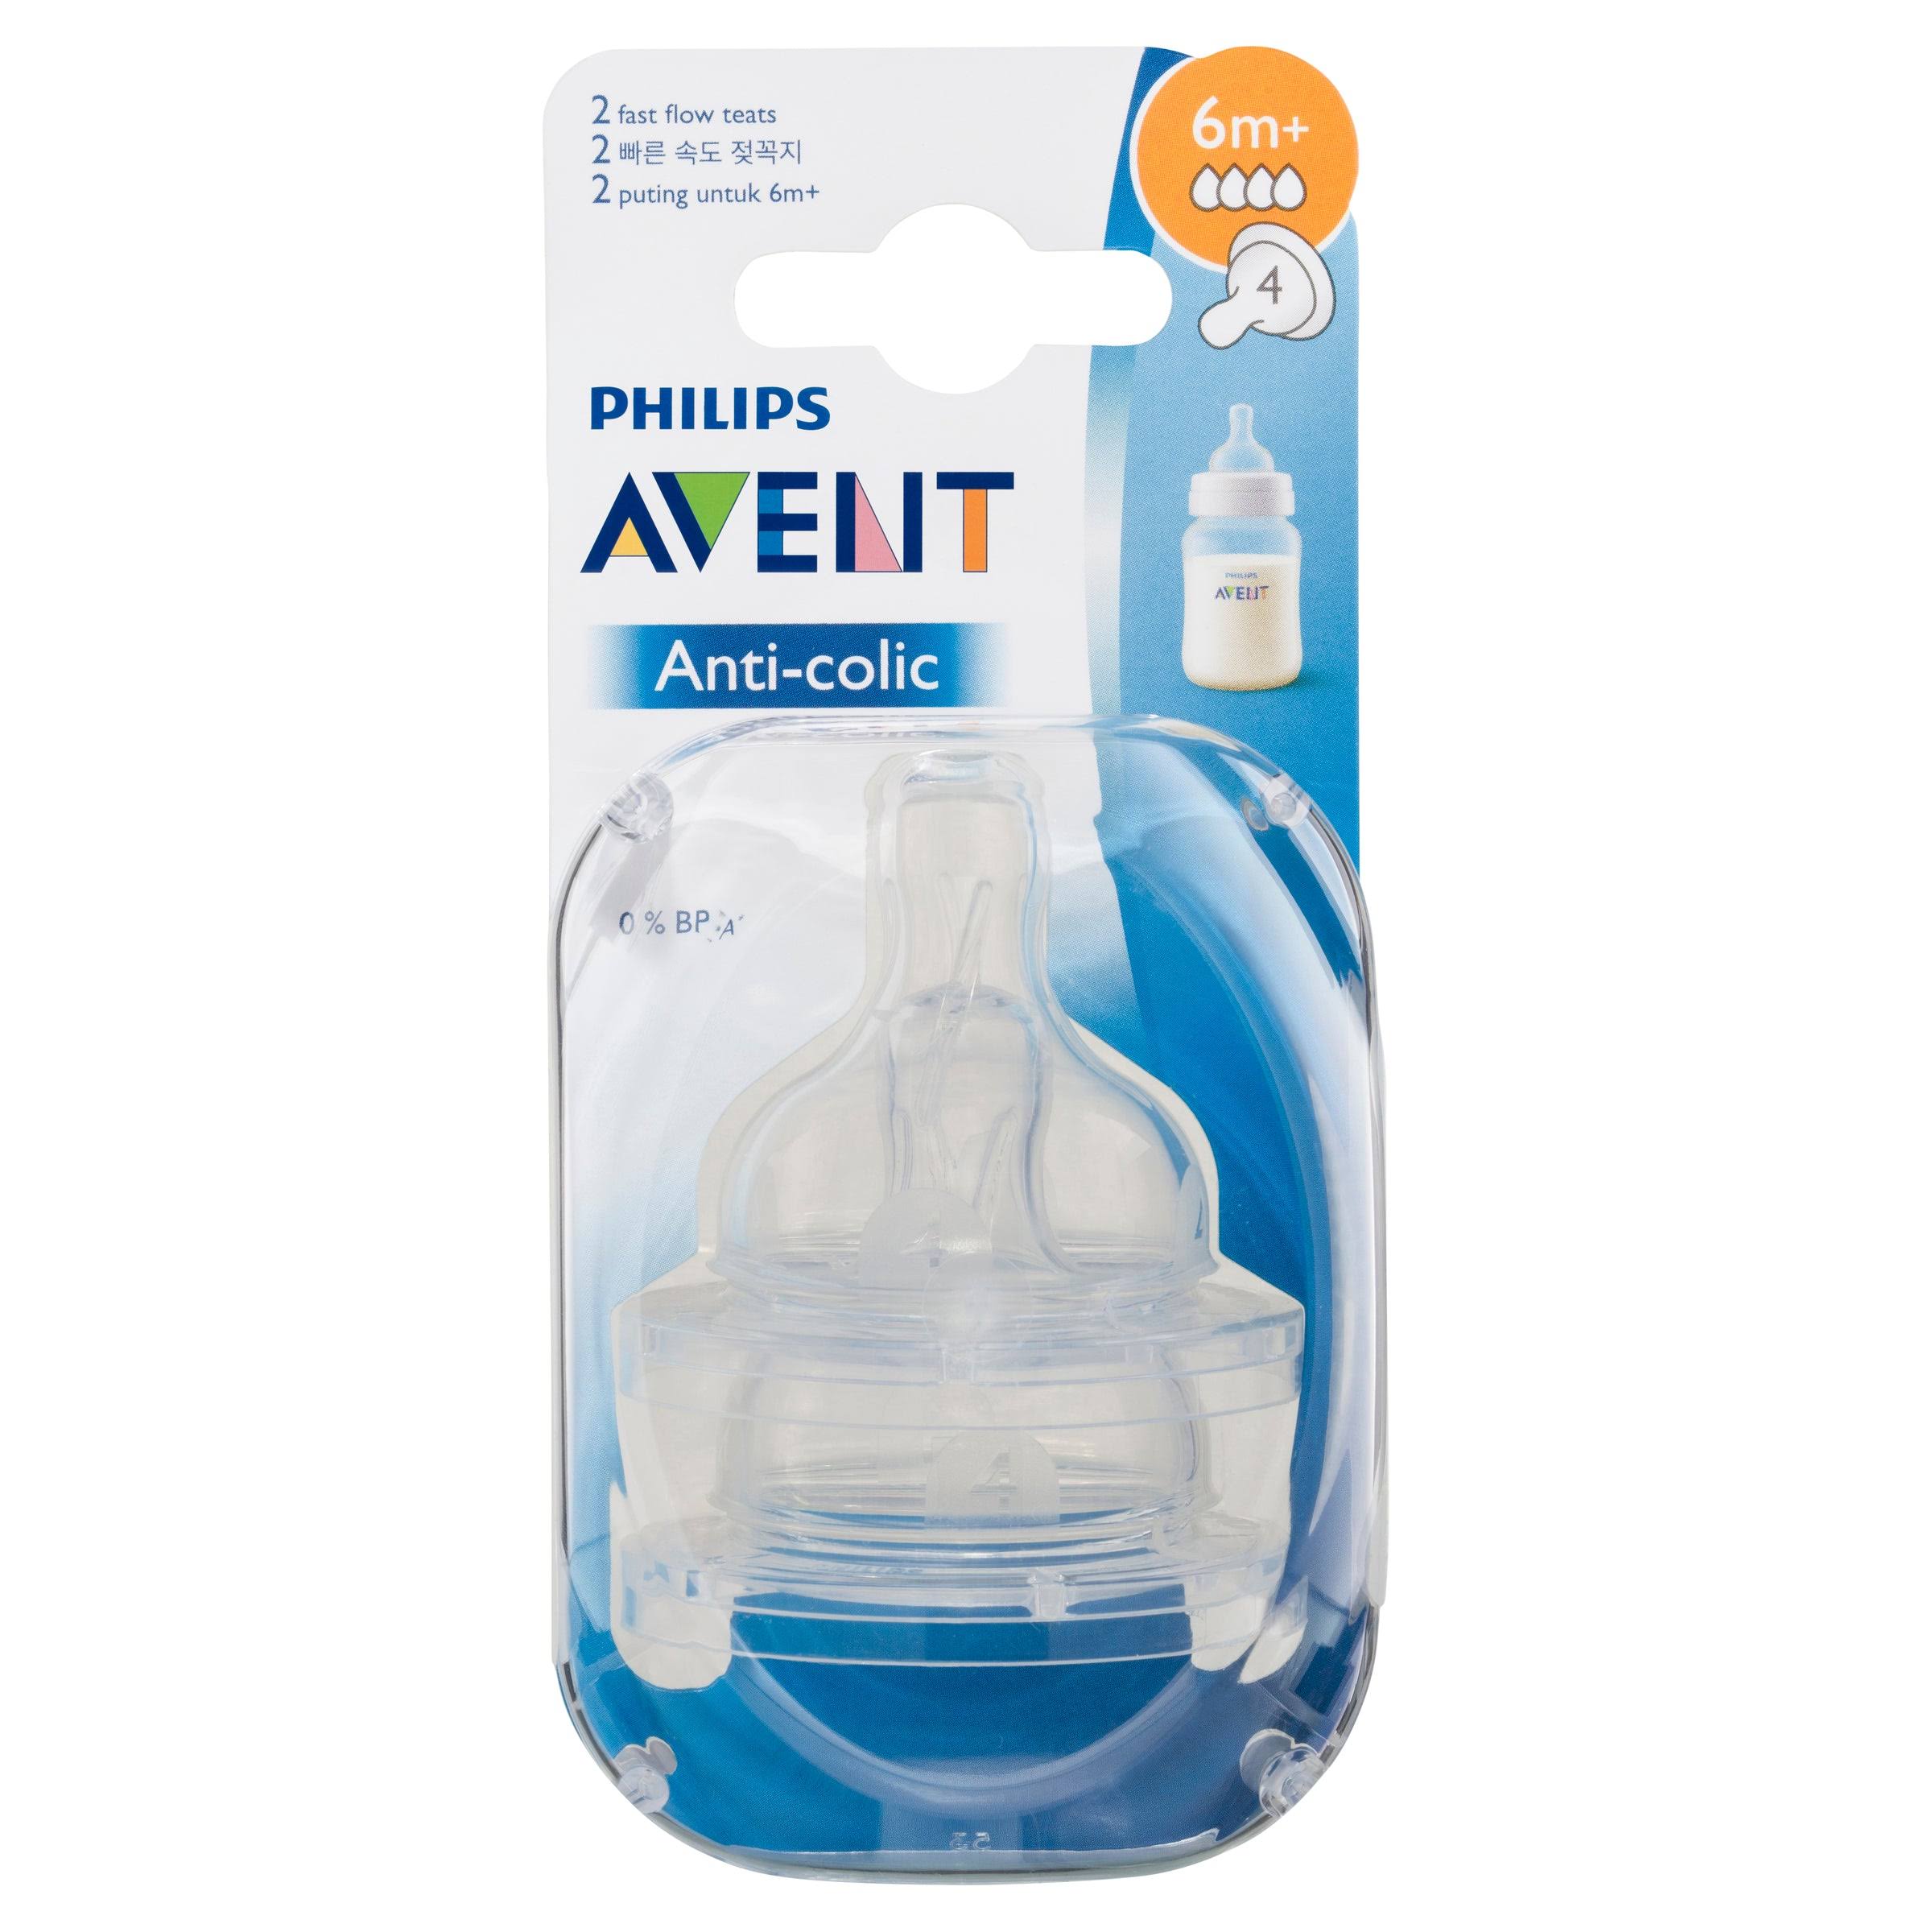 Philips Avent Classic Silicone Teat - 2 Fast Flow Teats